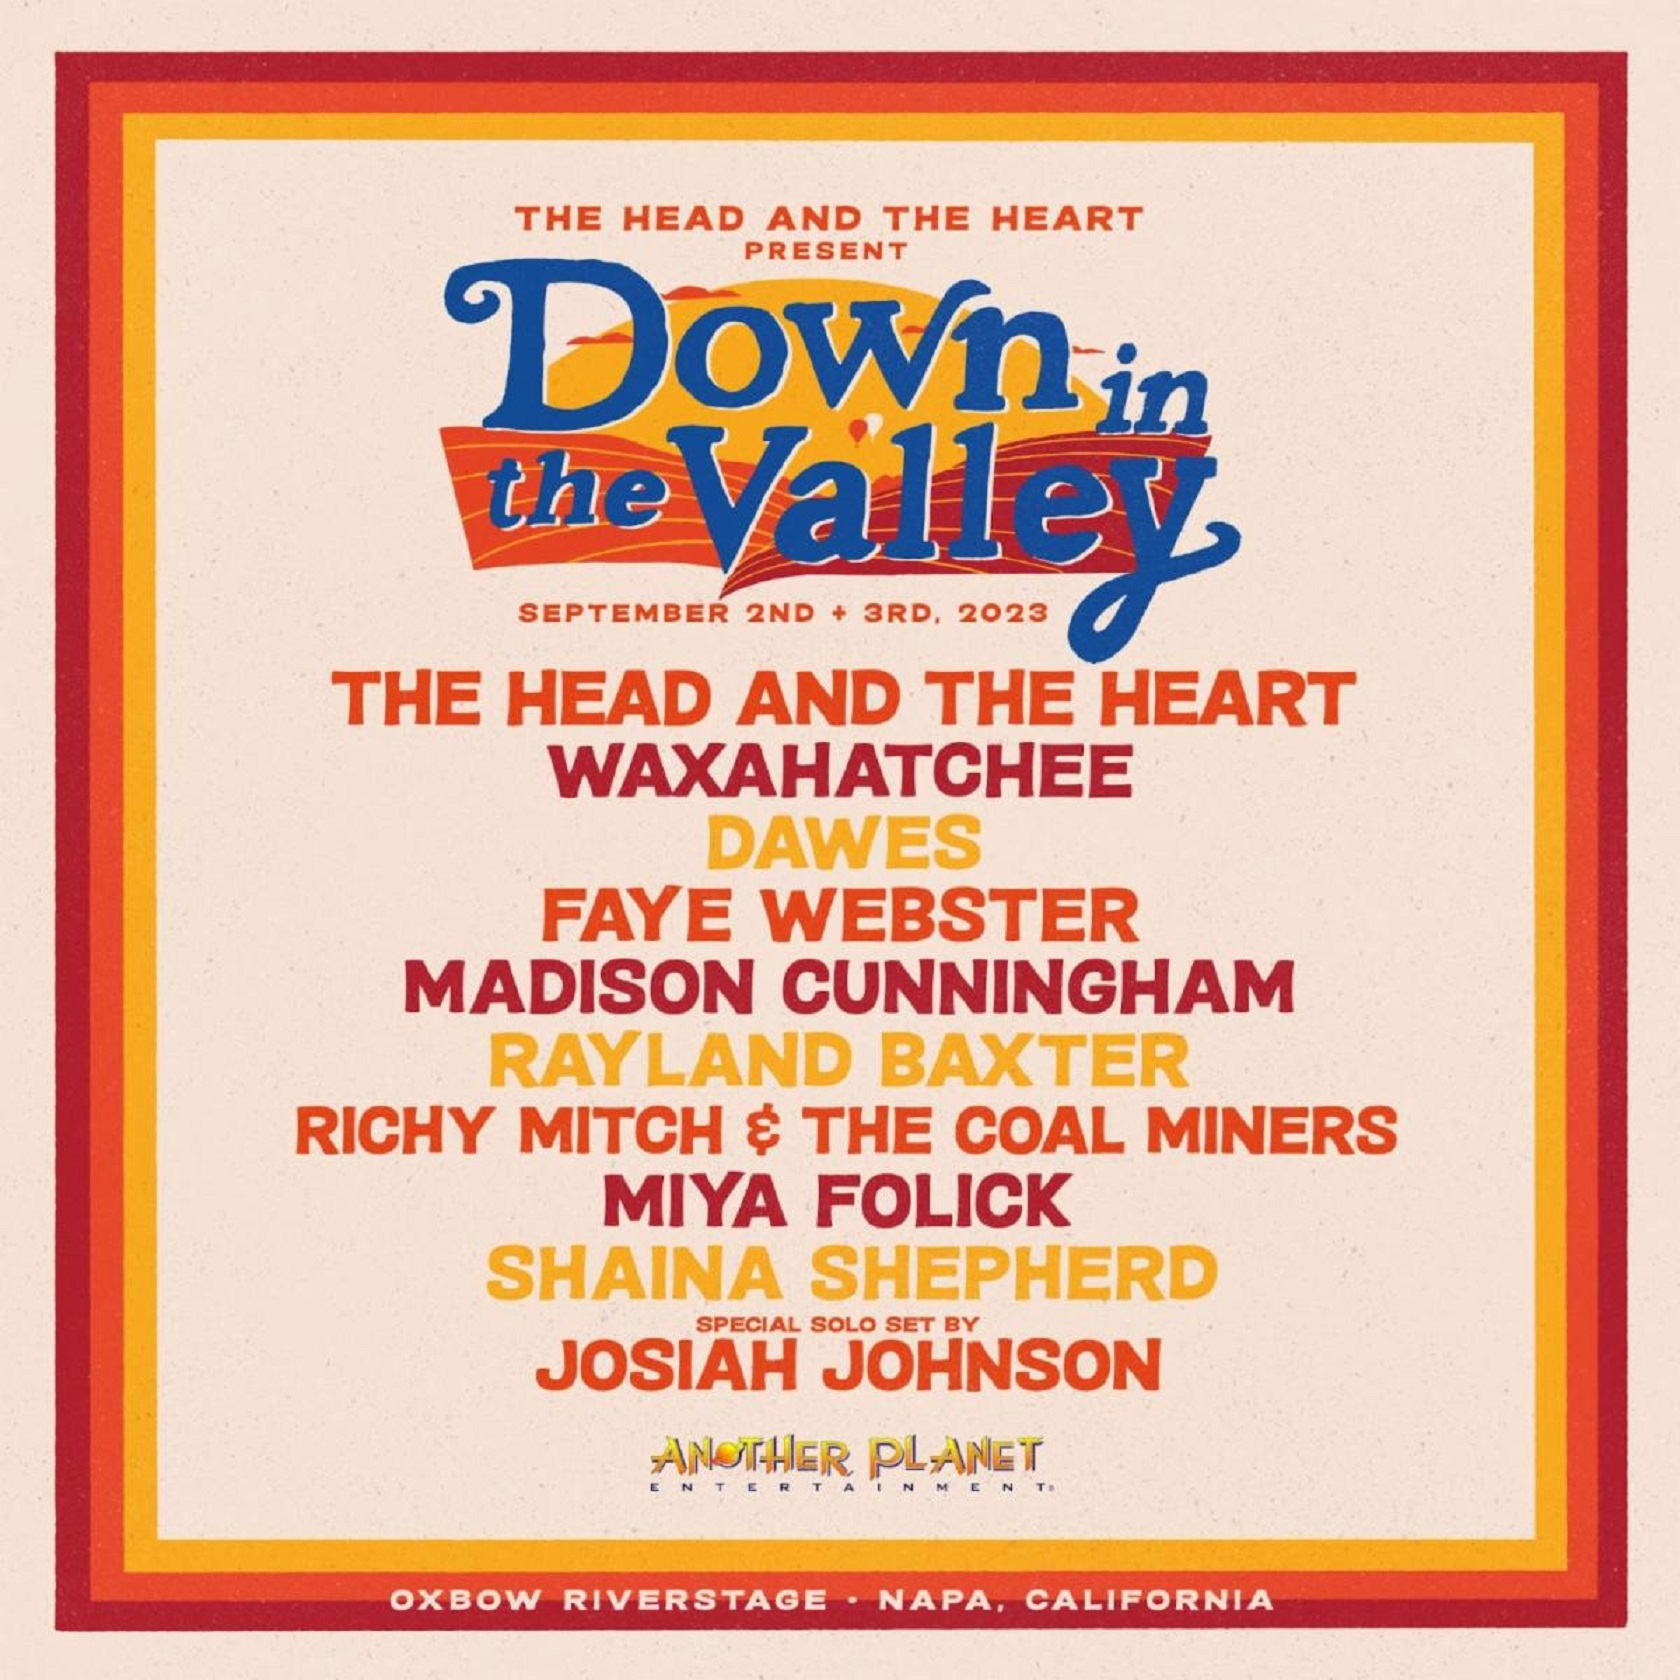 The Head And The Heart & Another Planet Entertainment Announce Line-Up for Down In The Valley Sept 2-3 Napa, CA